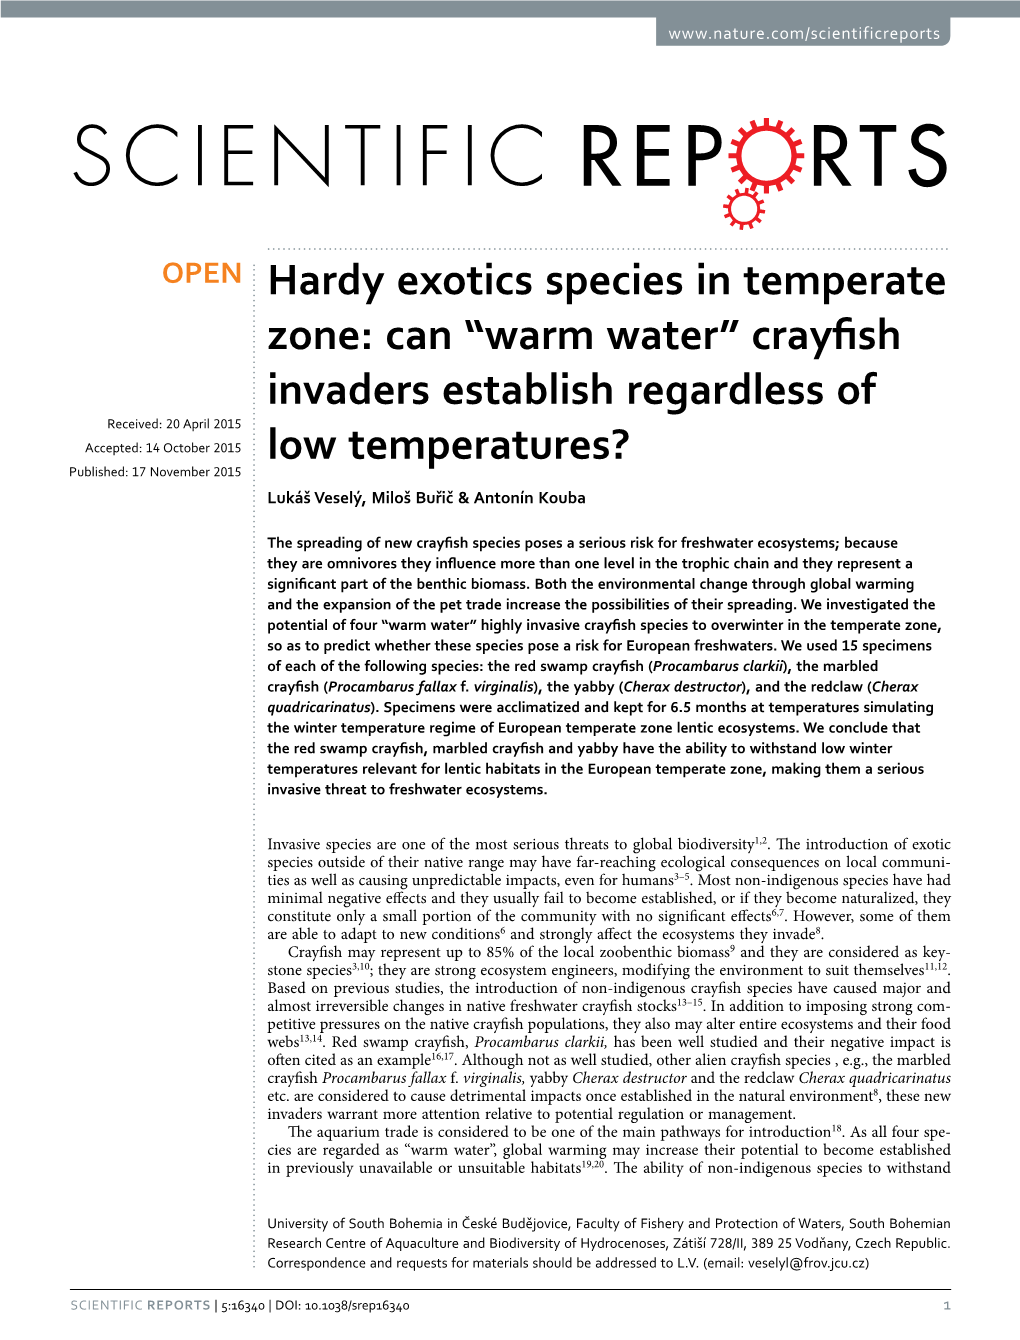 Hardy Exotics Species in Temperate Zone: Can “Warm Water” Crayfish